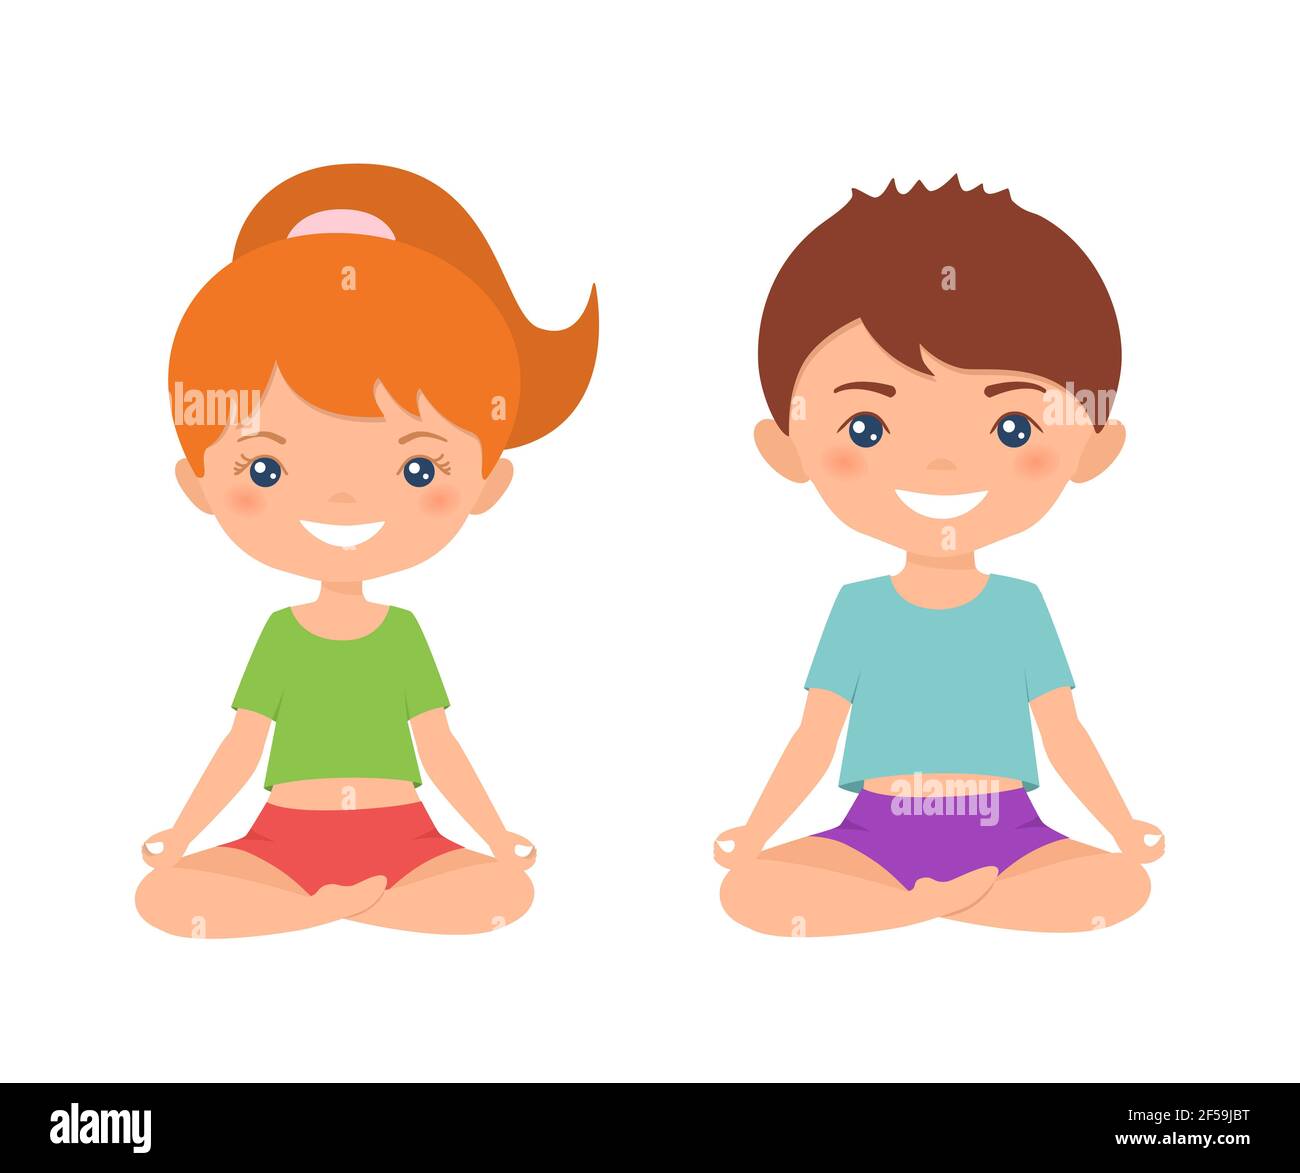 Girls and boys doing yoga. Cute yoga kids set. Stock Vector by